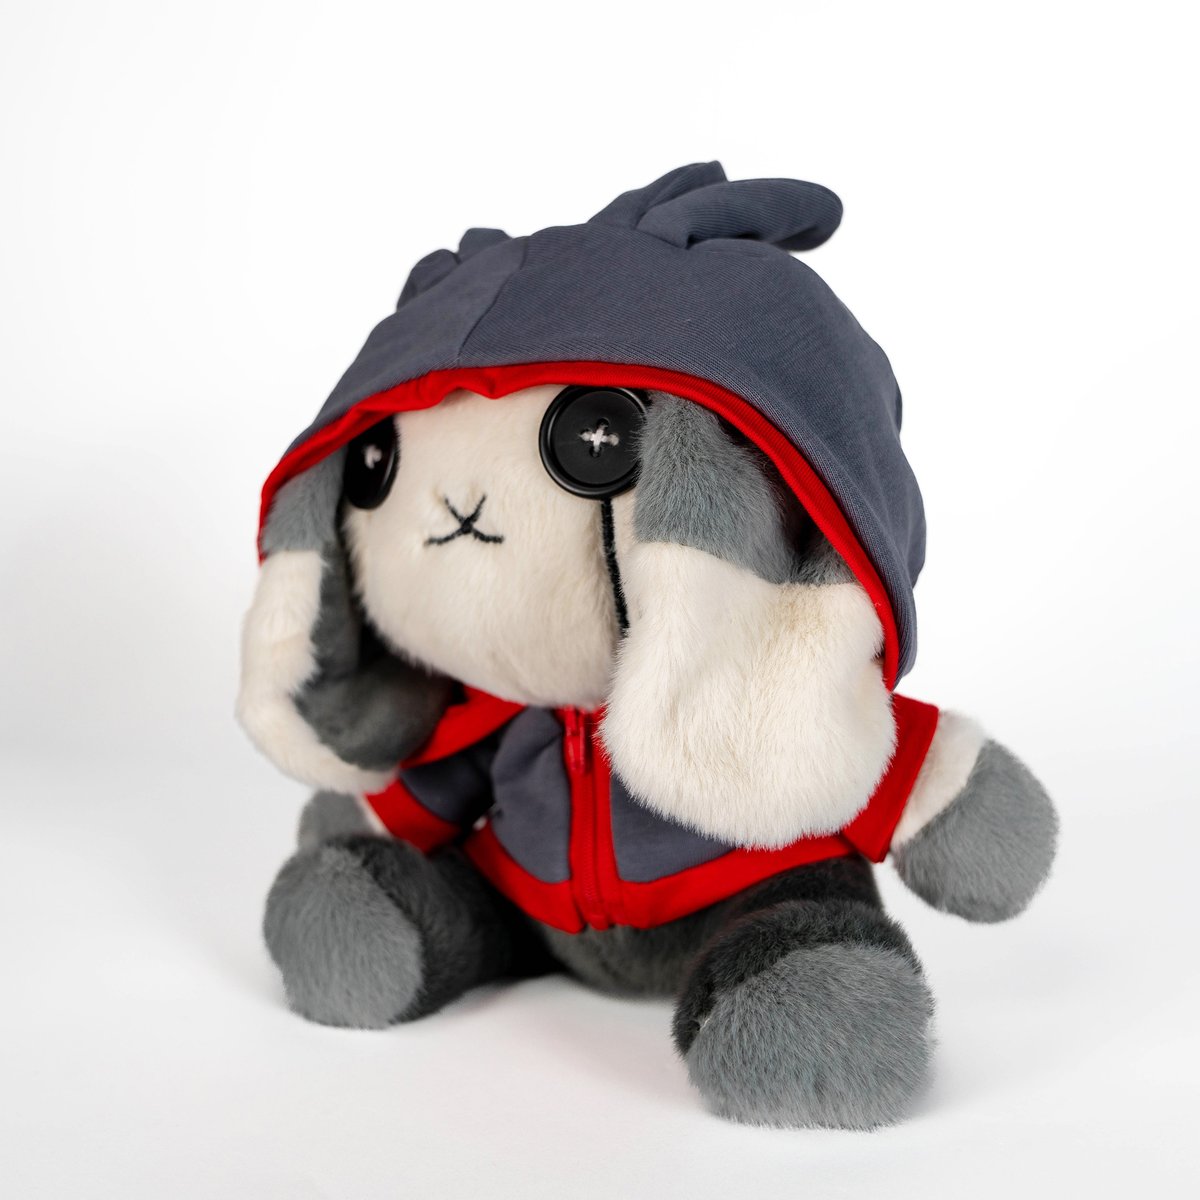 AVPD Rabbit has launched! 🥺

Take him home but please don't look directly at them it makes them nervous 👉👈

mysterious.americanmcgee.com/products/plush…

#avoidant #anxietyawareness #plushie